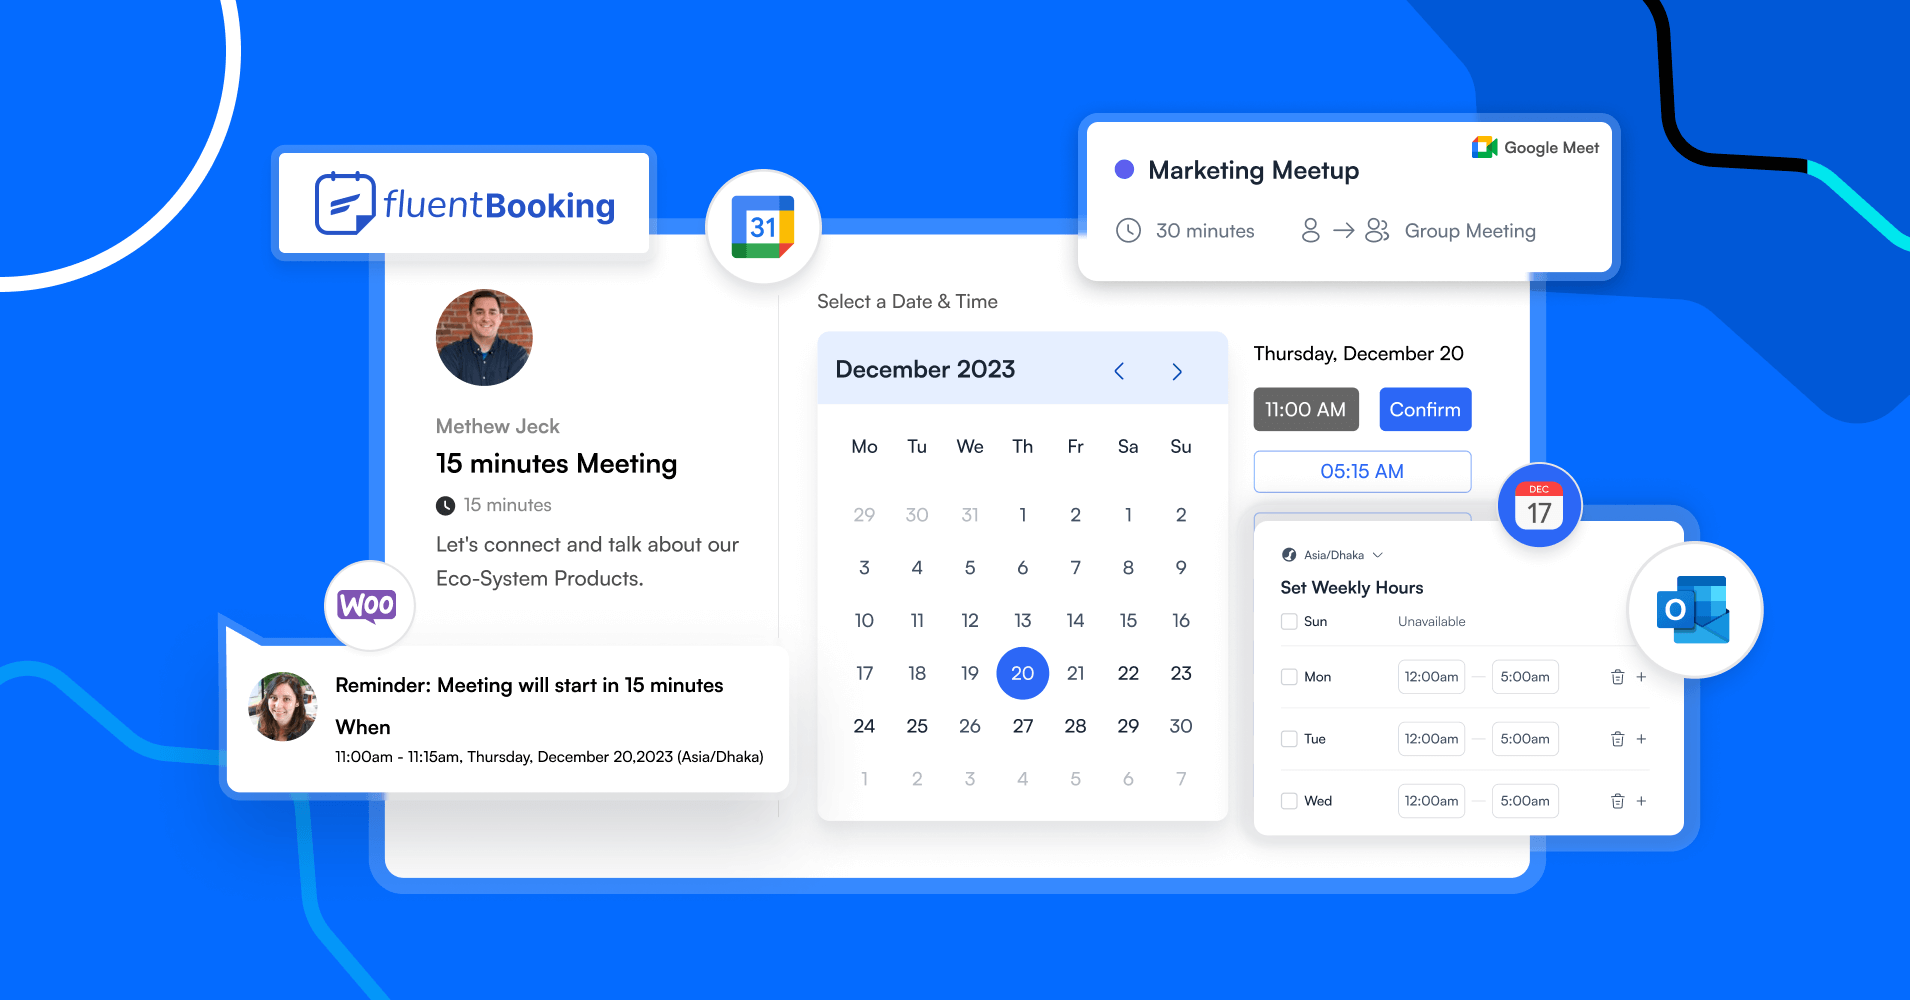 fluentbooking objectives and vision